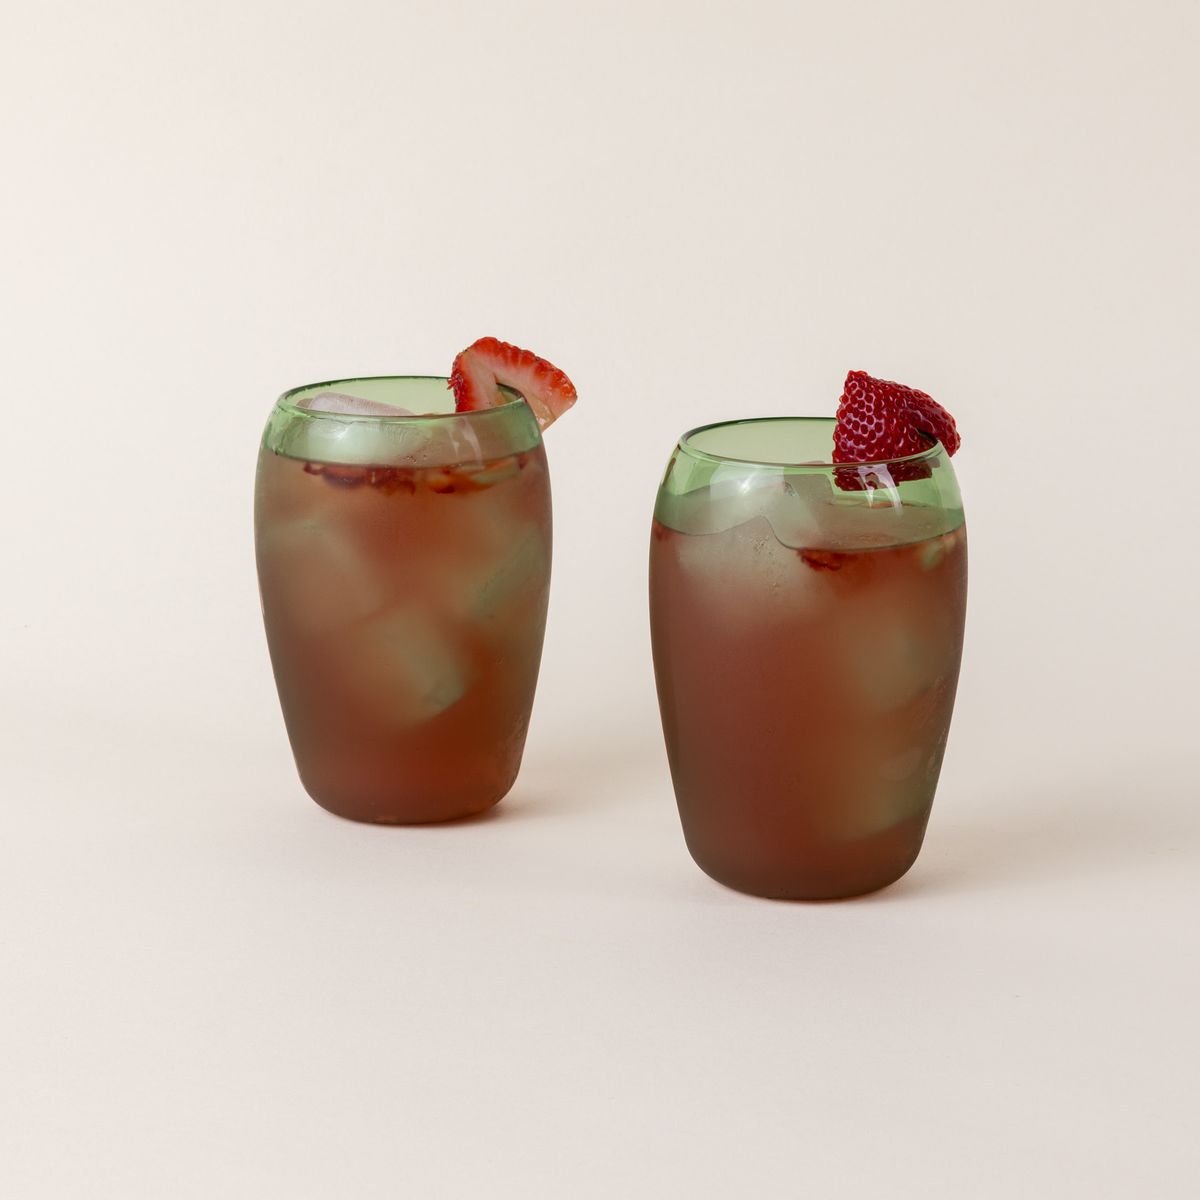 Two tall light green glass tumblers with a slight curve inward on the top. The glasses are filled with a red cocktail with sliced strawberries on the rim.